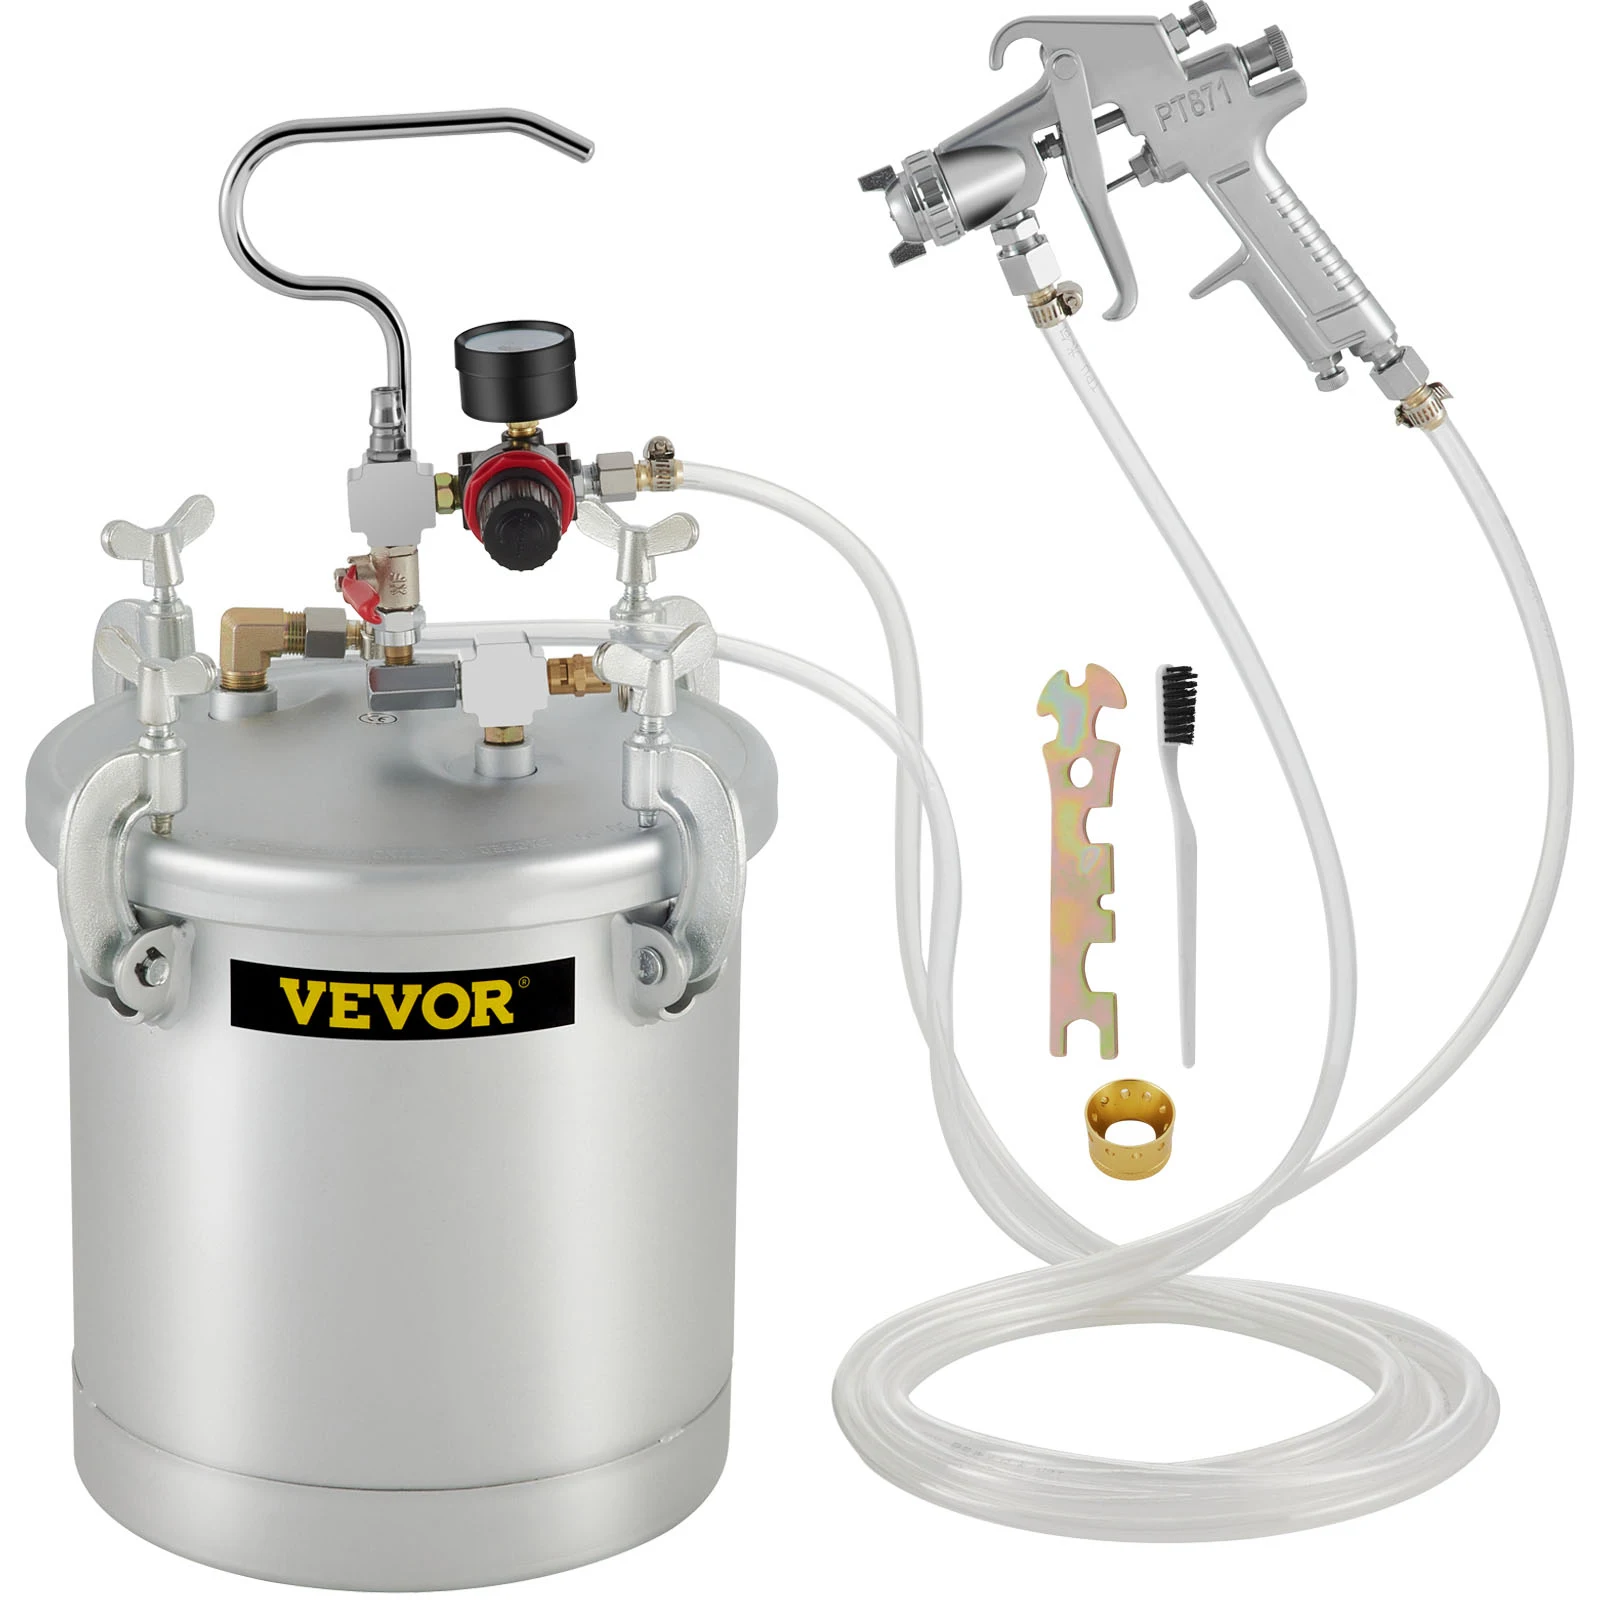 VEVOR High Pressure Paint Pot 10L 15L Sprayer Tank W/ Spray Gun & Hose for Home Industrial Commercial Painting Spraying Coating